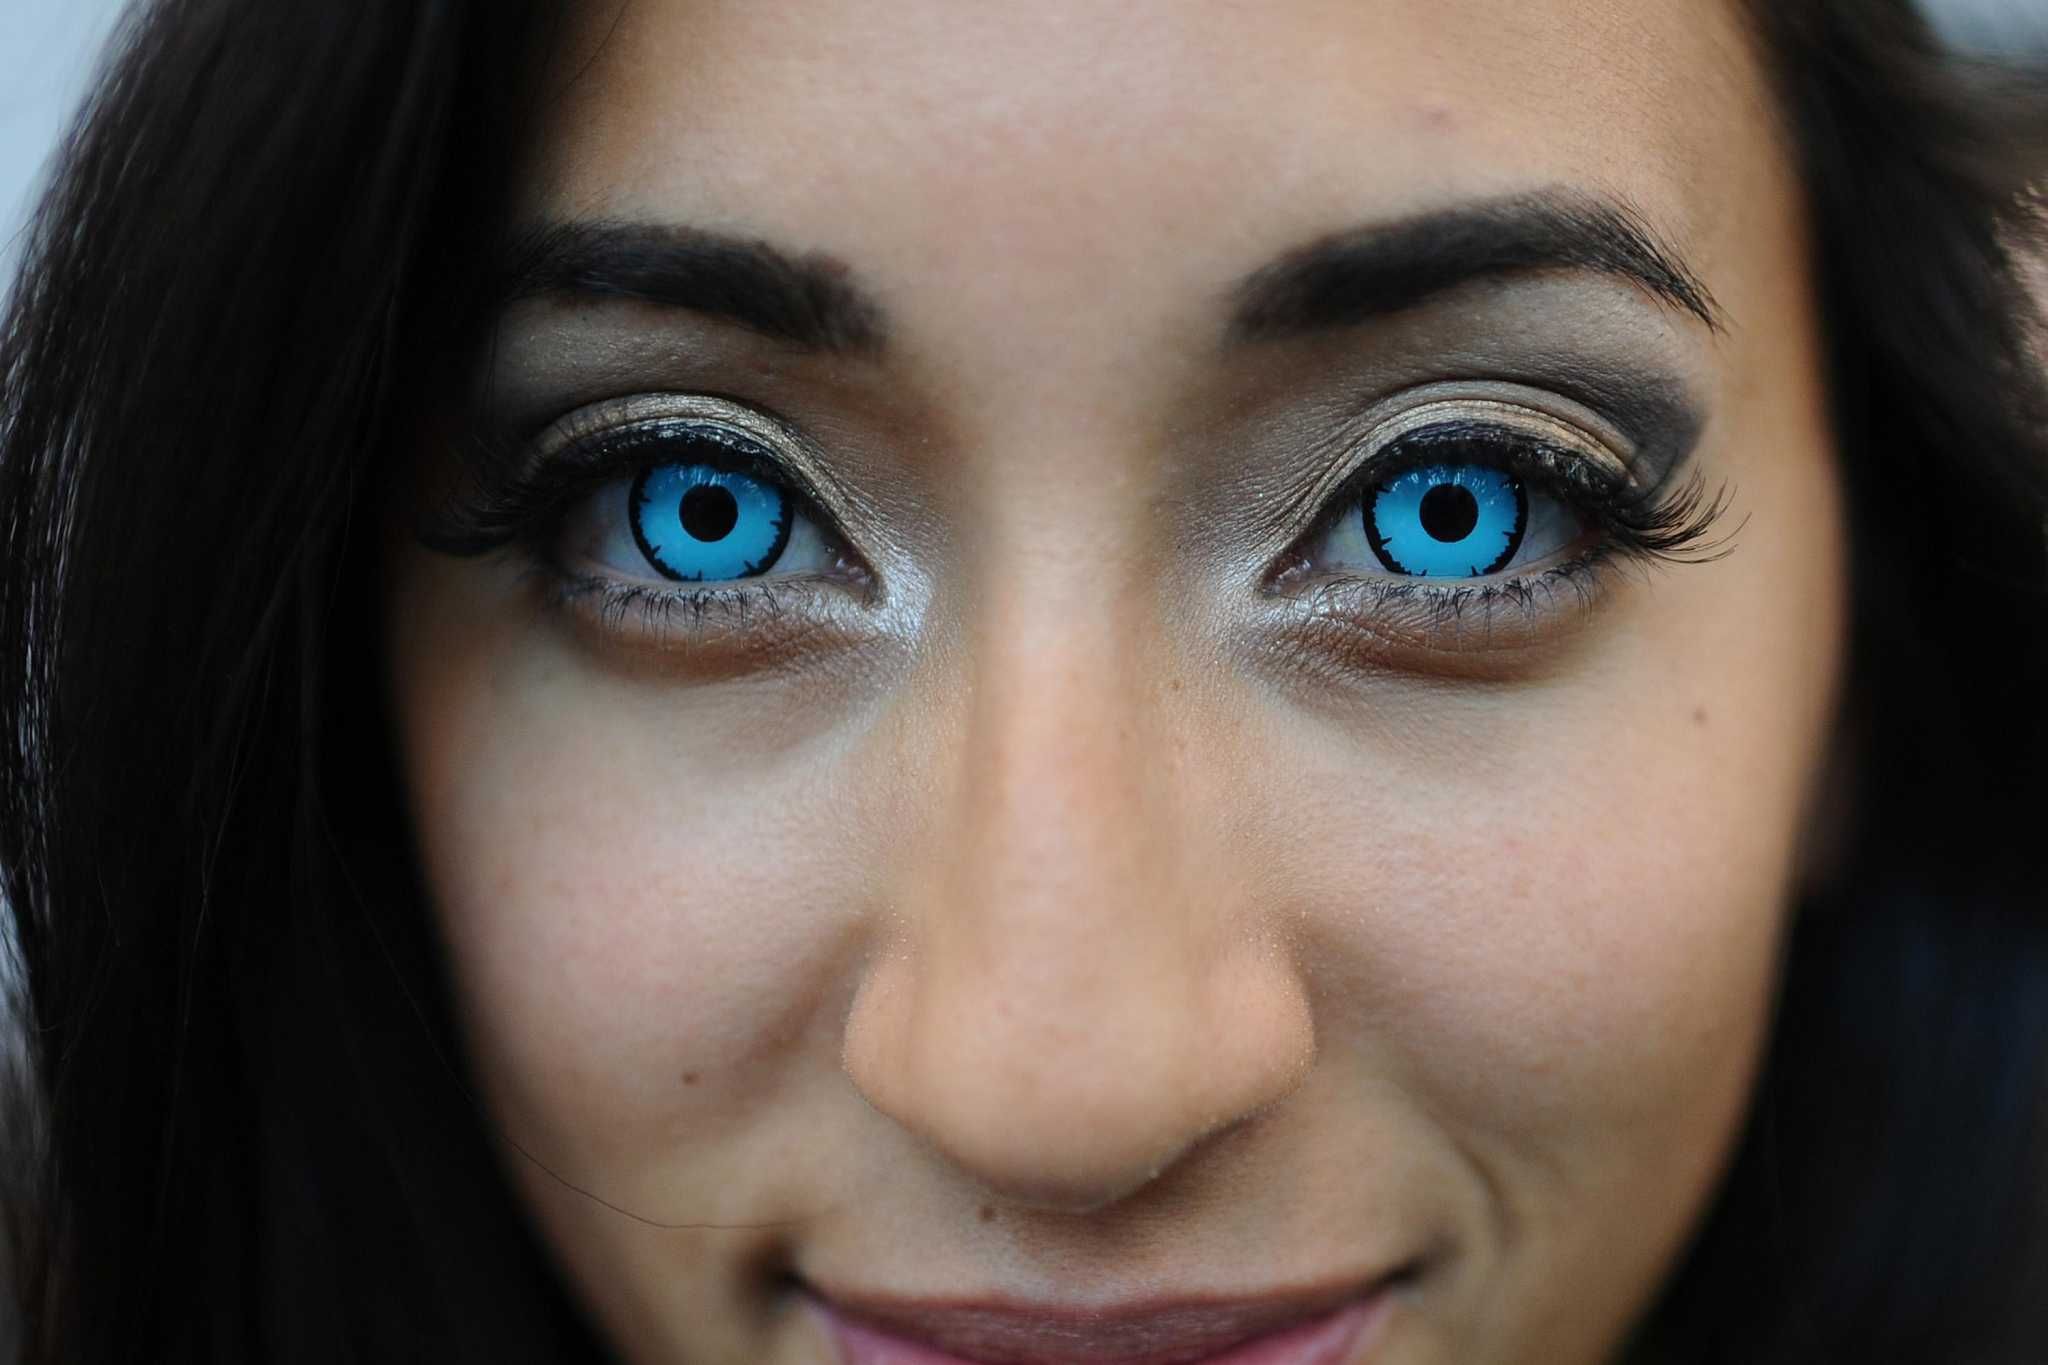 Halloween contact lenses can up your costume but damage